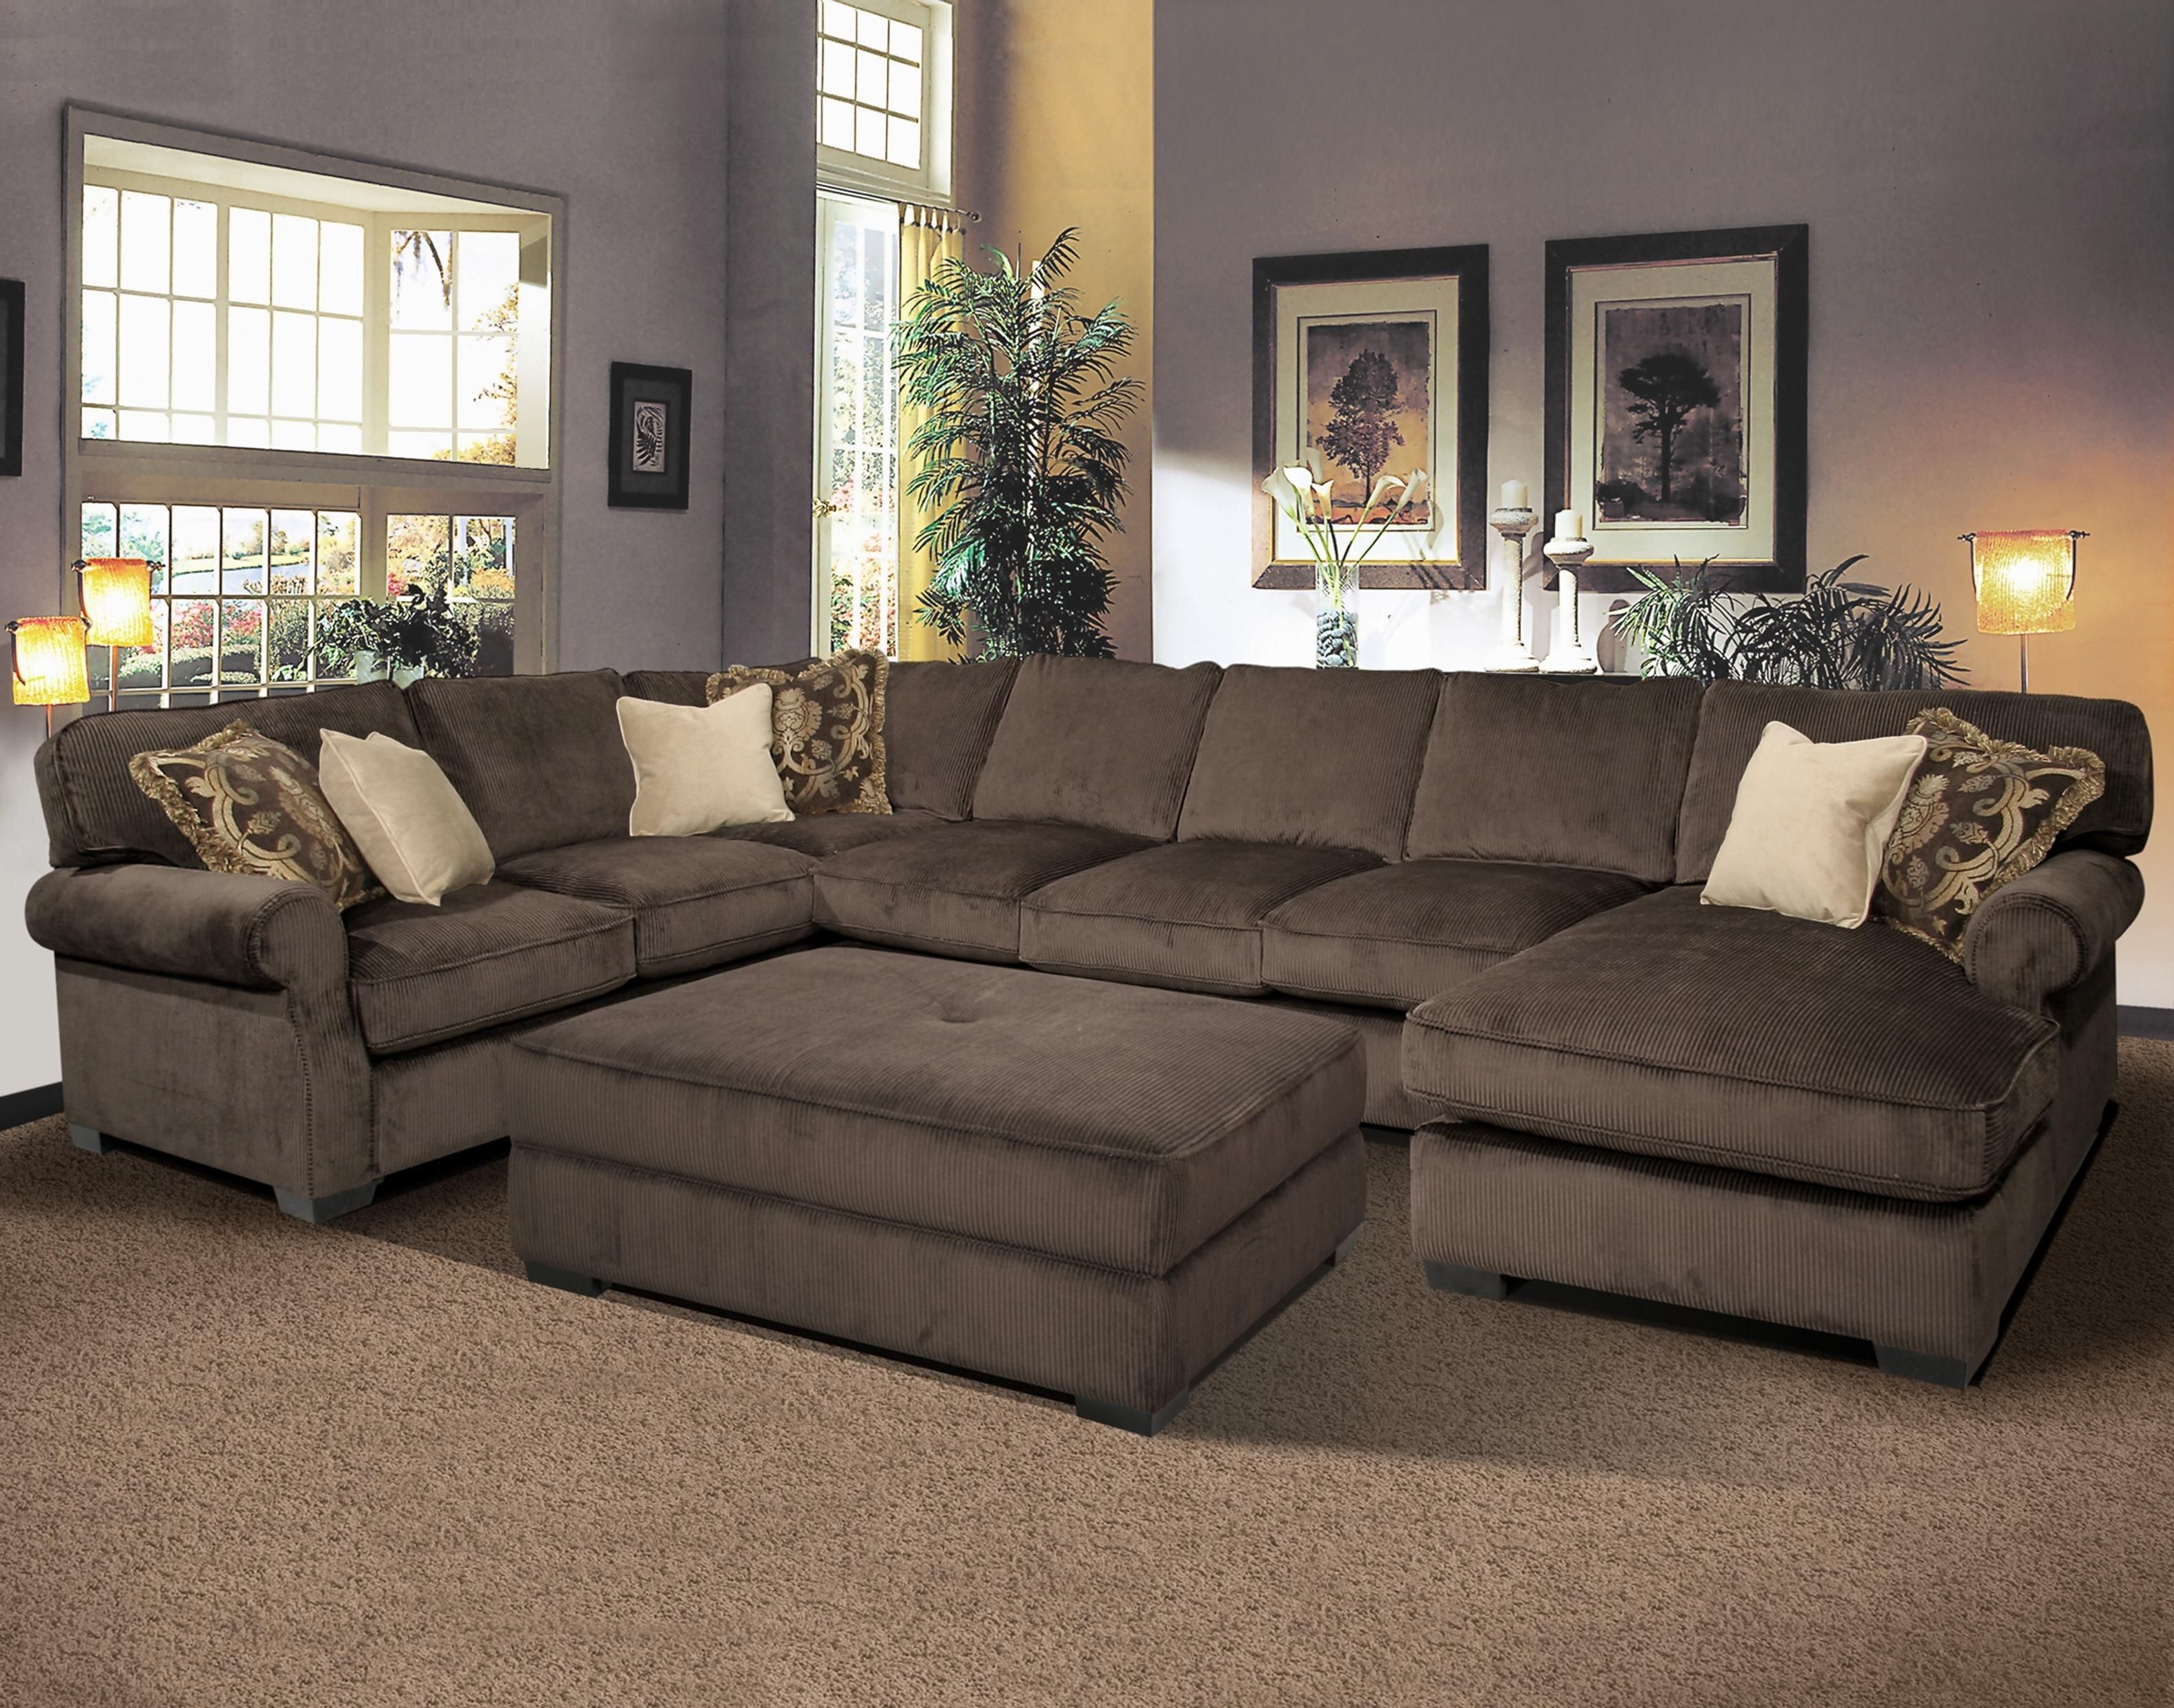 Grand Island Oversized Cocktail Ottoman For Sectional Sofa For Best And Newest Sectional Sofas With Ottoman (Photo 3 of 20)